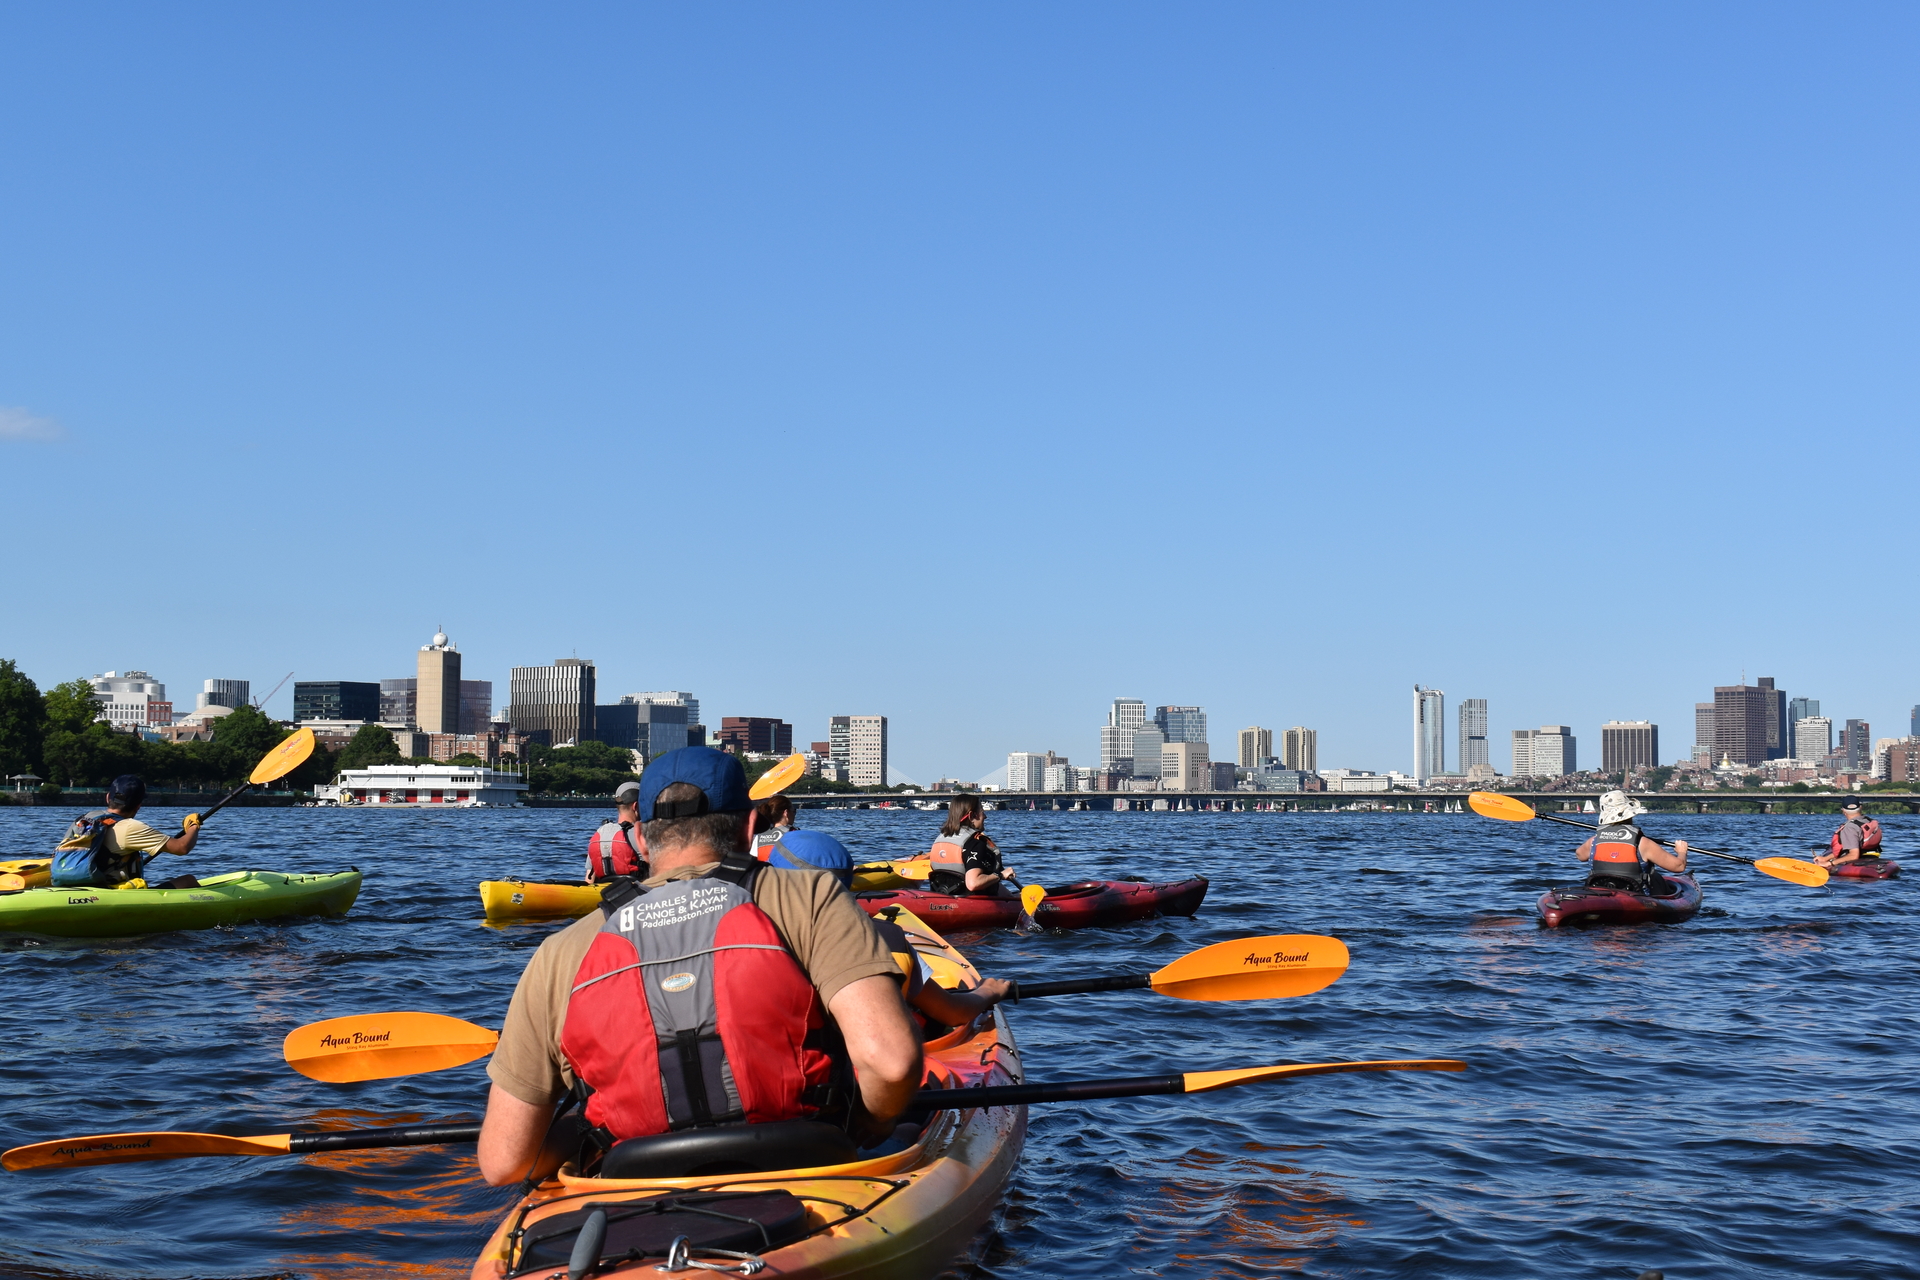 A group of kayakers in green or orange kayaks on a river. In the distance is a bridge and the Boston skyline.